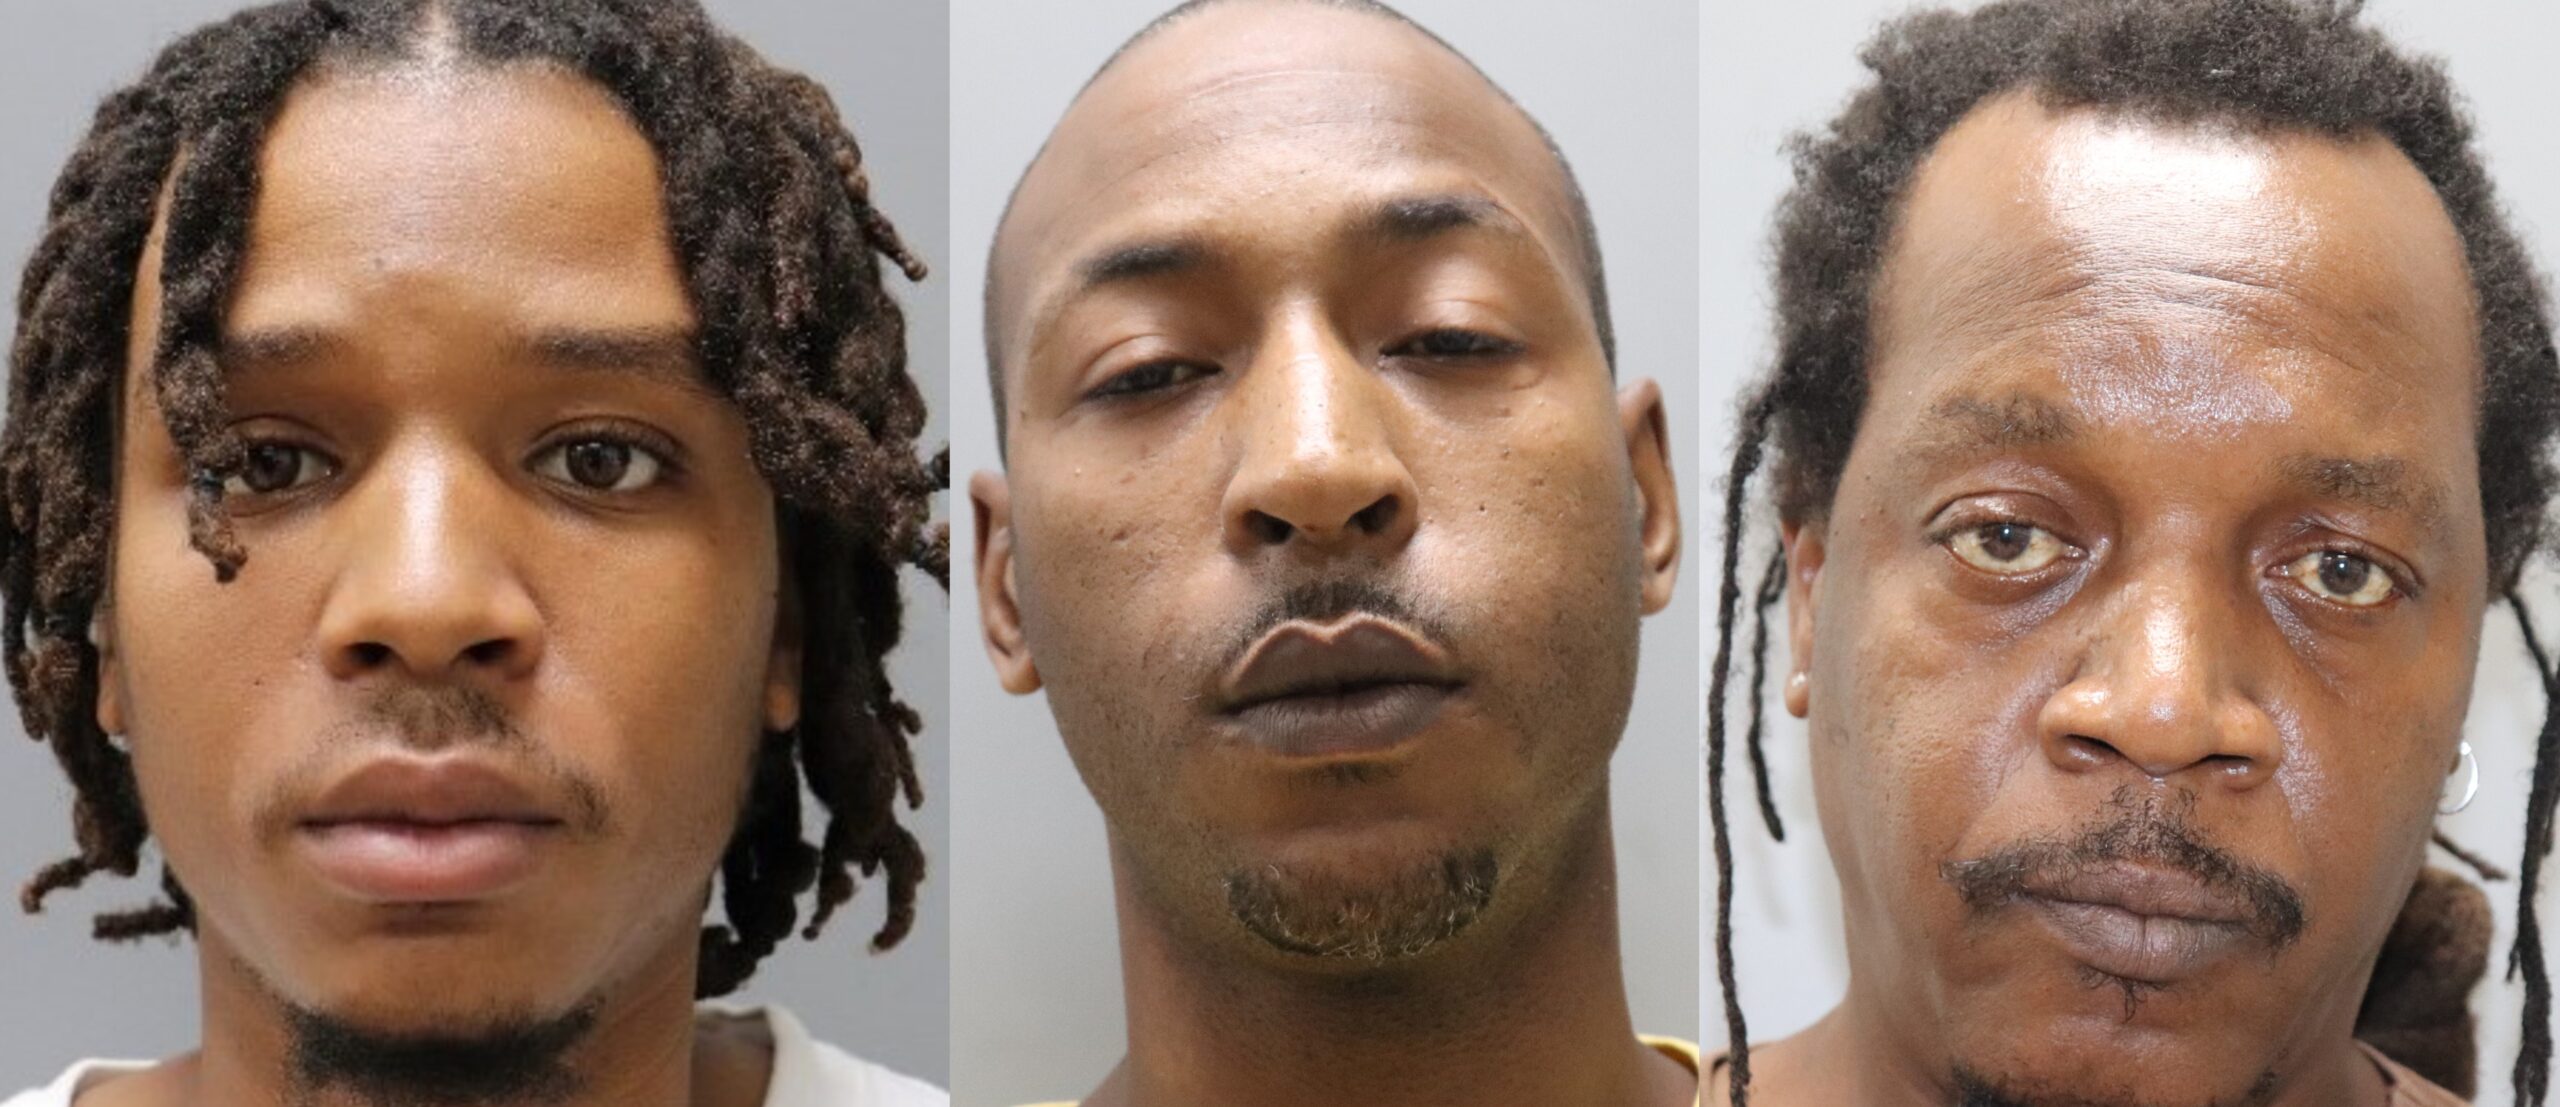 3 St. Thomas Men Arrested As Part Of VICI Anti-Crime Initiative In The USVI: VIPD